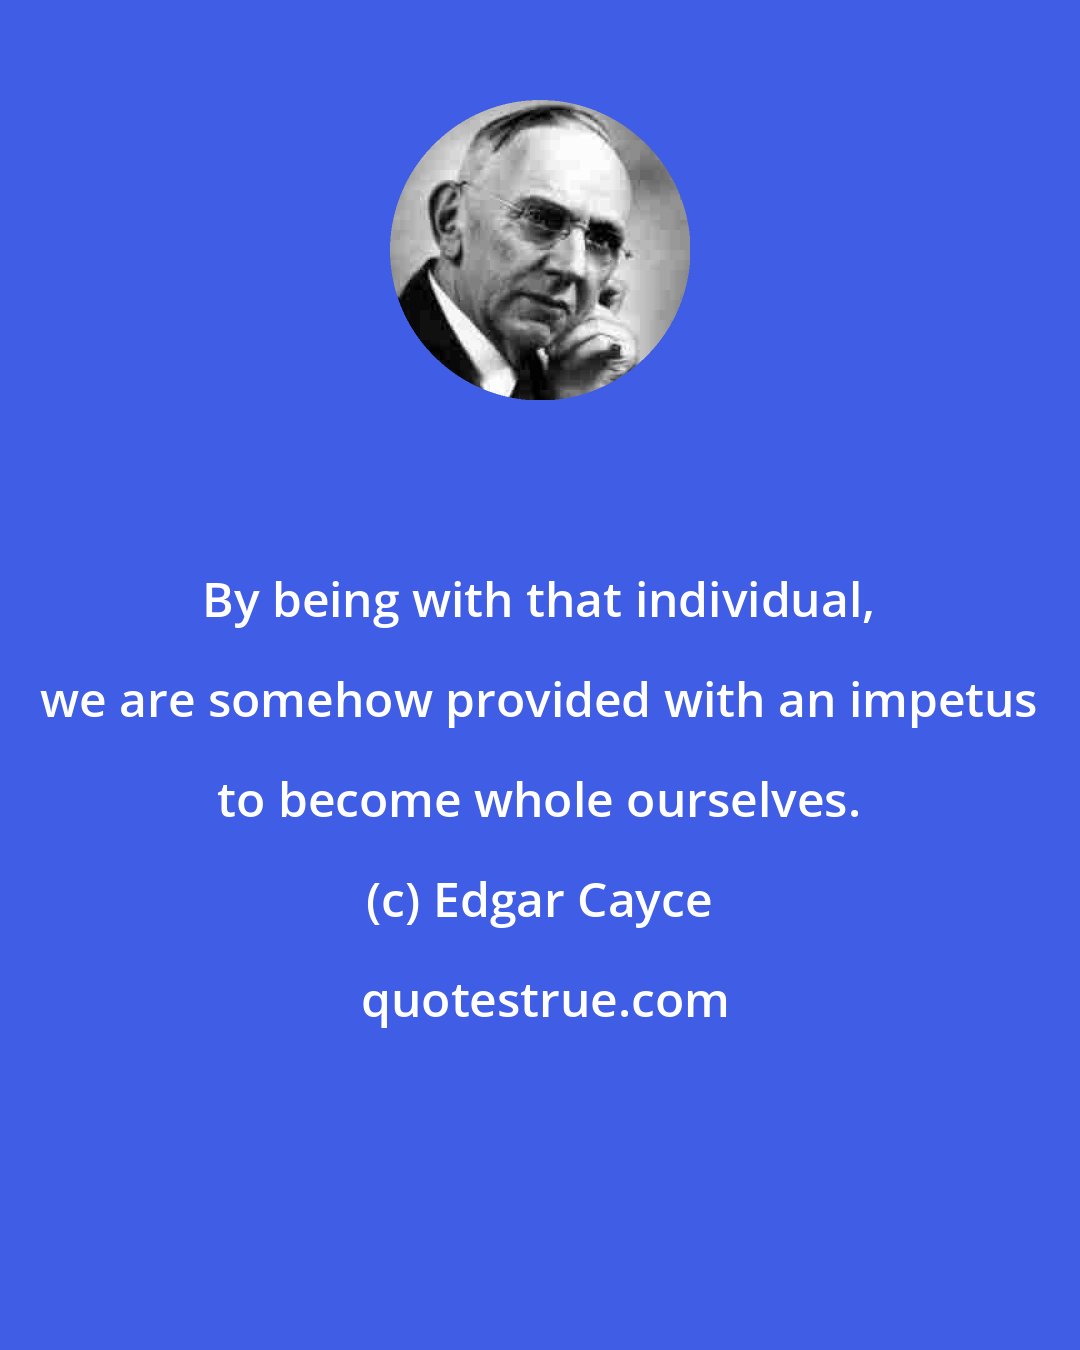 Edgar Cayce: By being with that individual, we are somehow provided with an impetus to become whole ourselves.